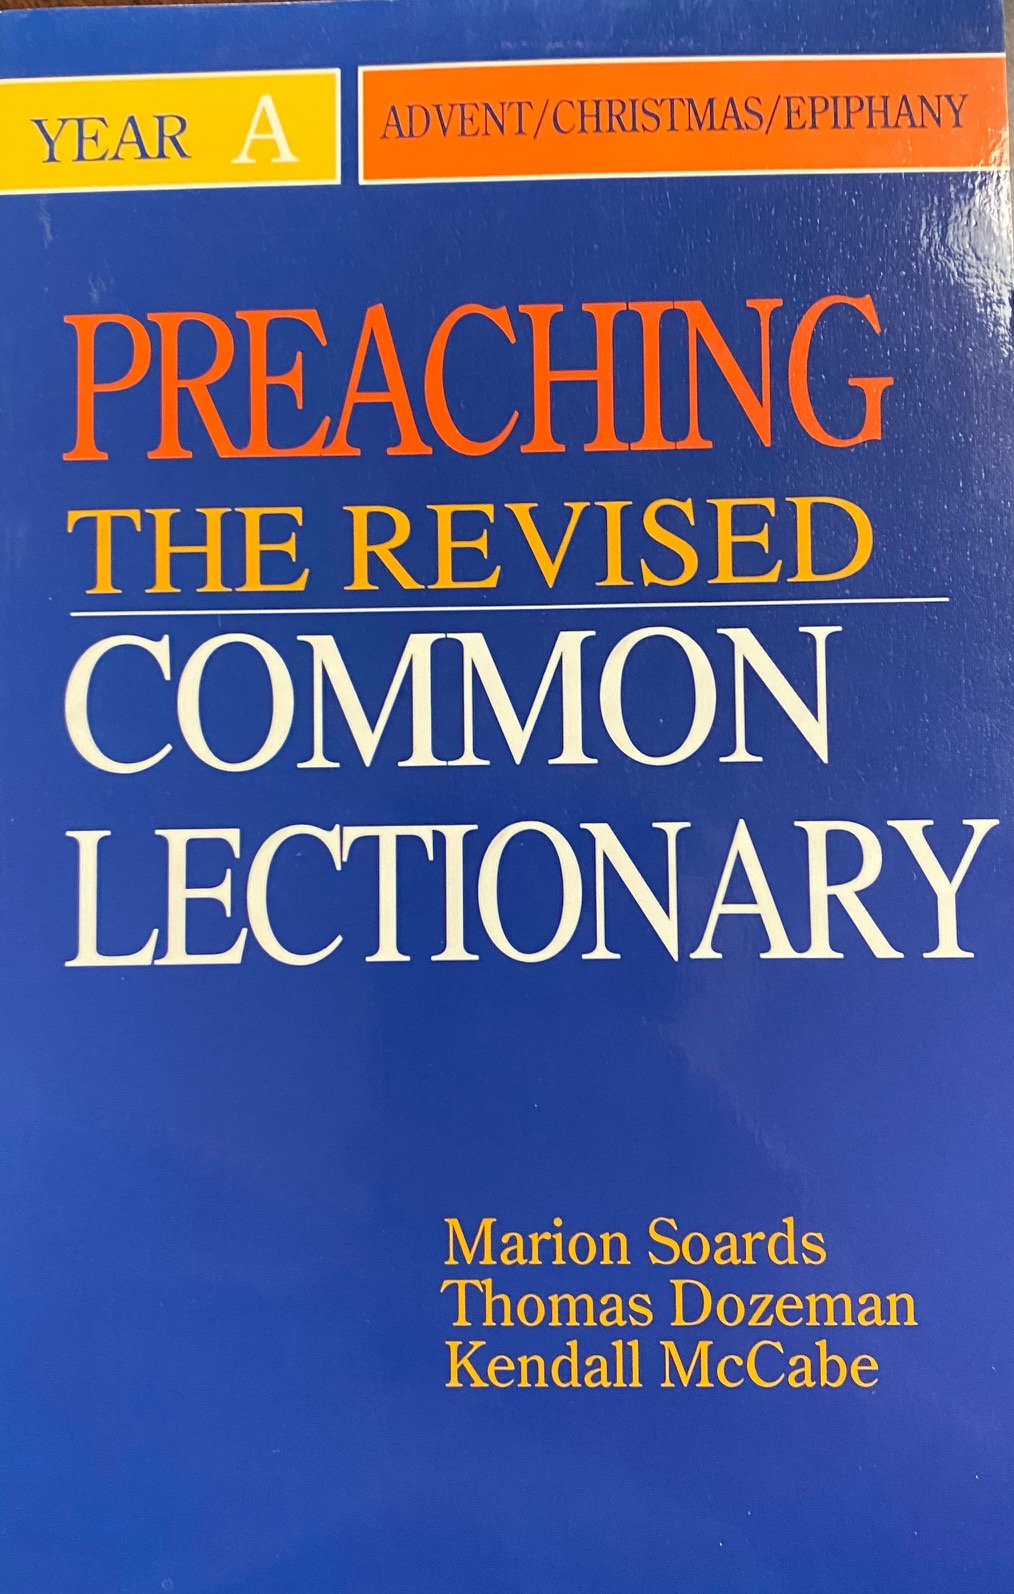 Preaching the Revised Common Lectionary Year A Advent/Christmas